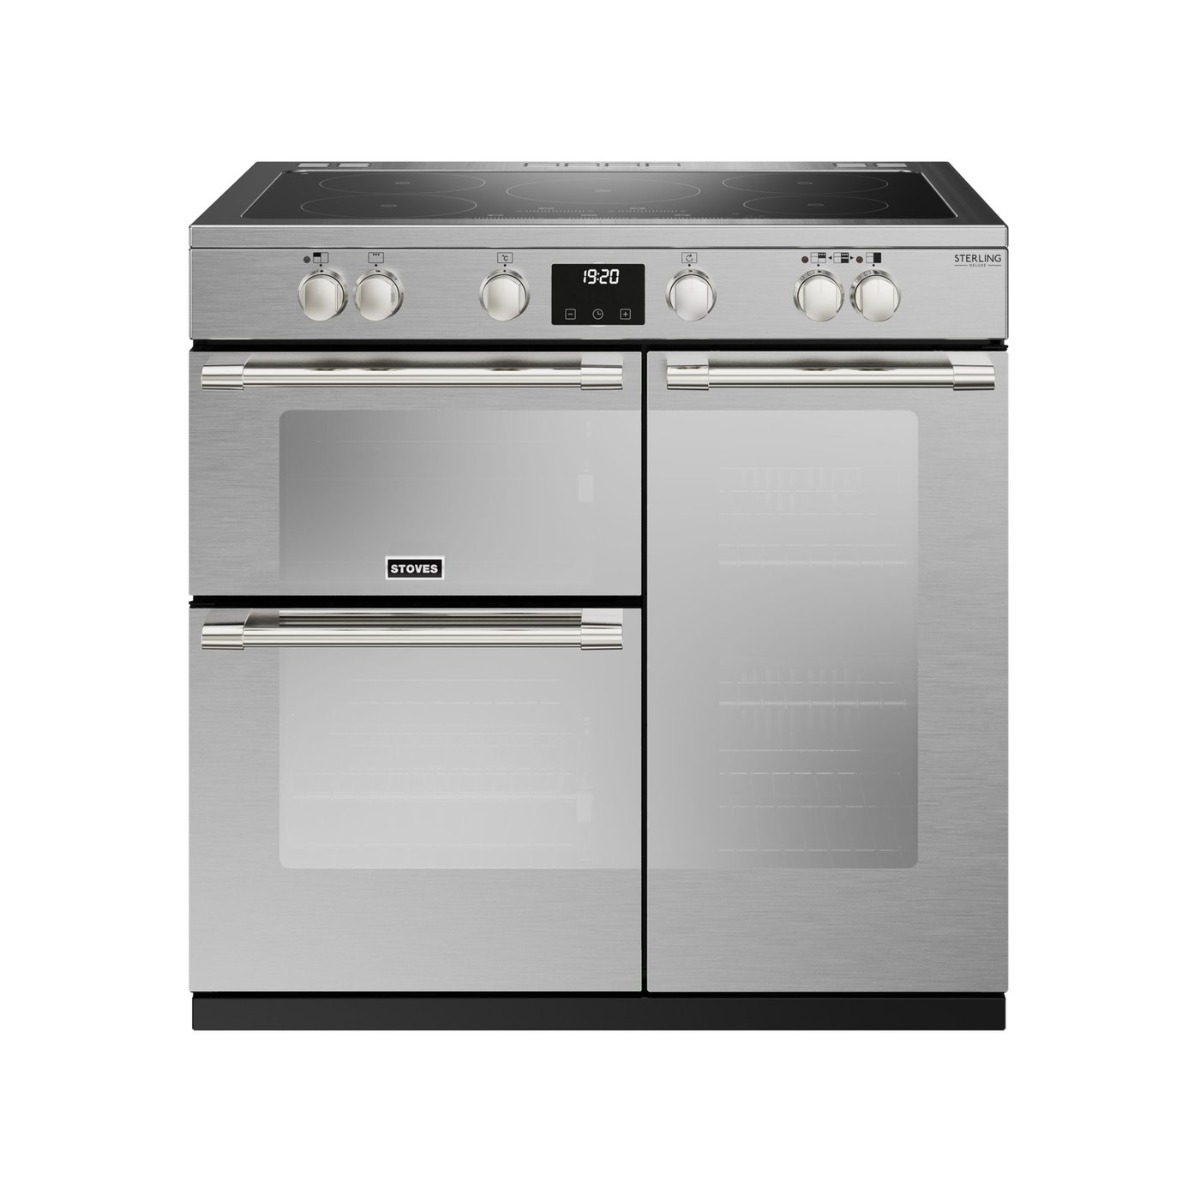 Stoves STRDXS900EITCHSS 90cm Induction Range Cooker - Stainless Steel